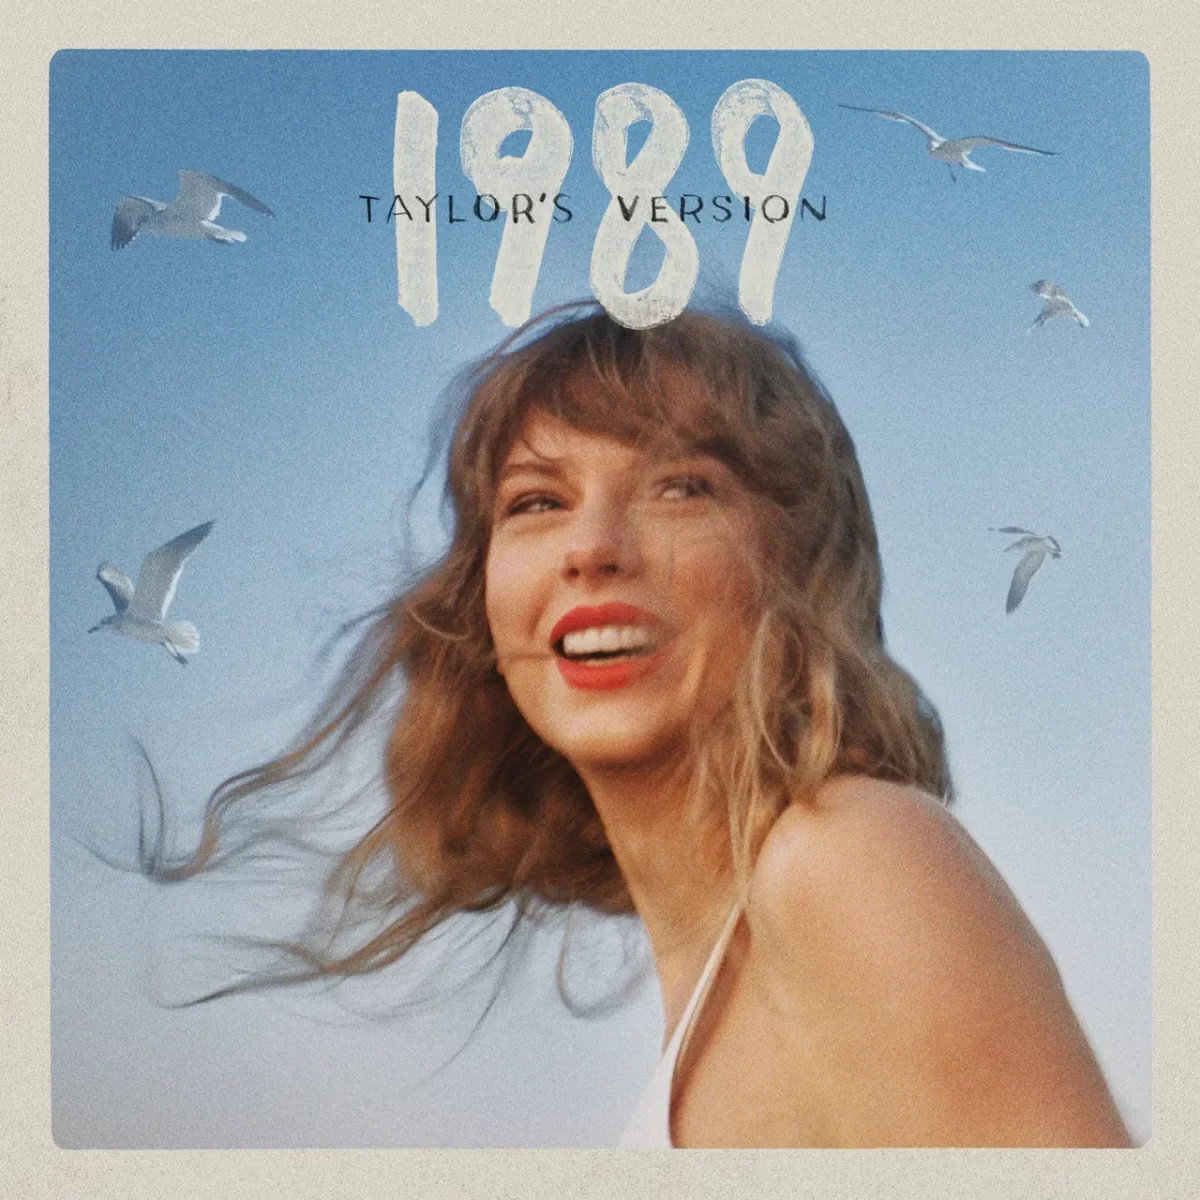 Staff member reviews 1989 (Taylors Version) from the vault tracks